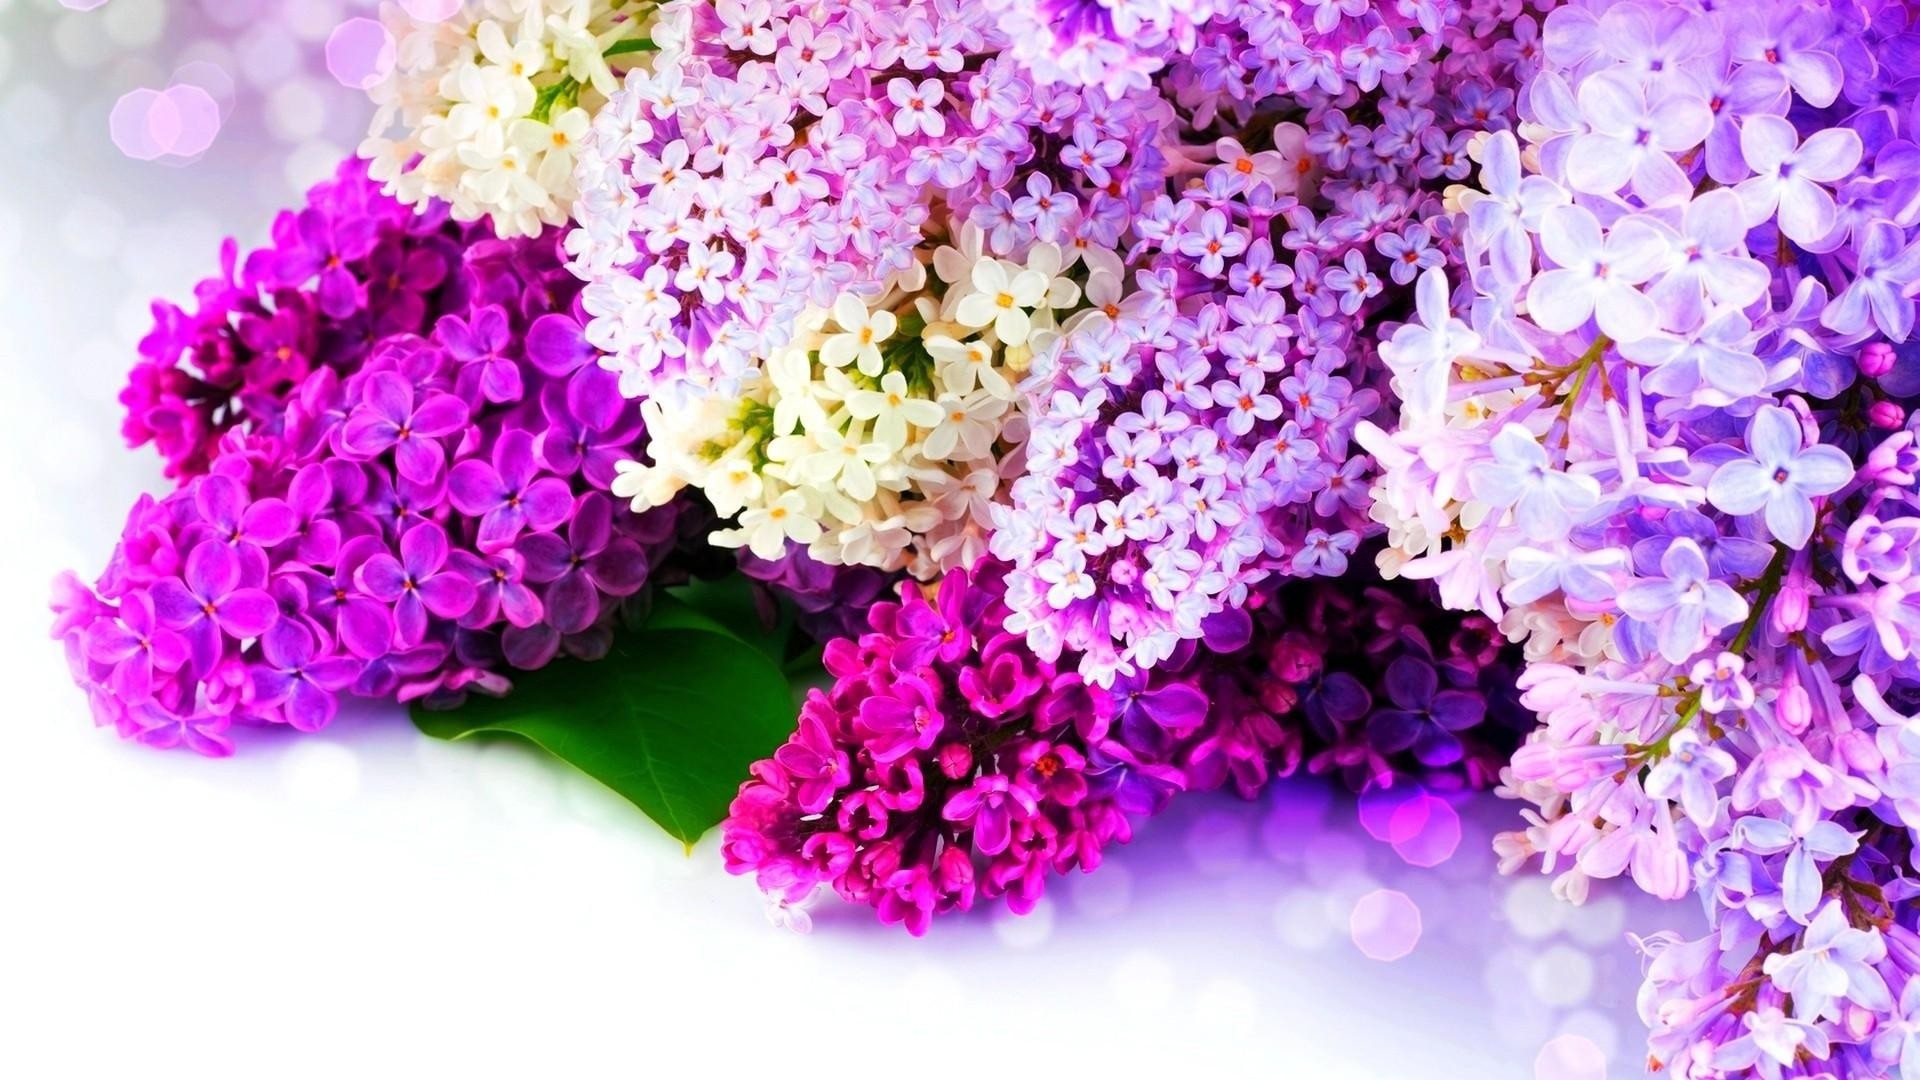 If You Found Any Images Copyrighted To Yours, Please - Real Flower Background Hd , HD Wallpaper & Backgrounds